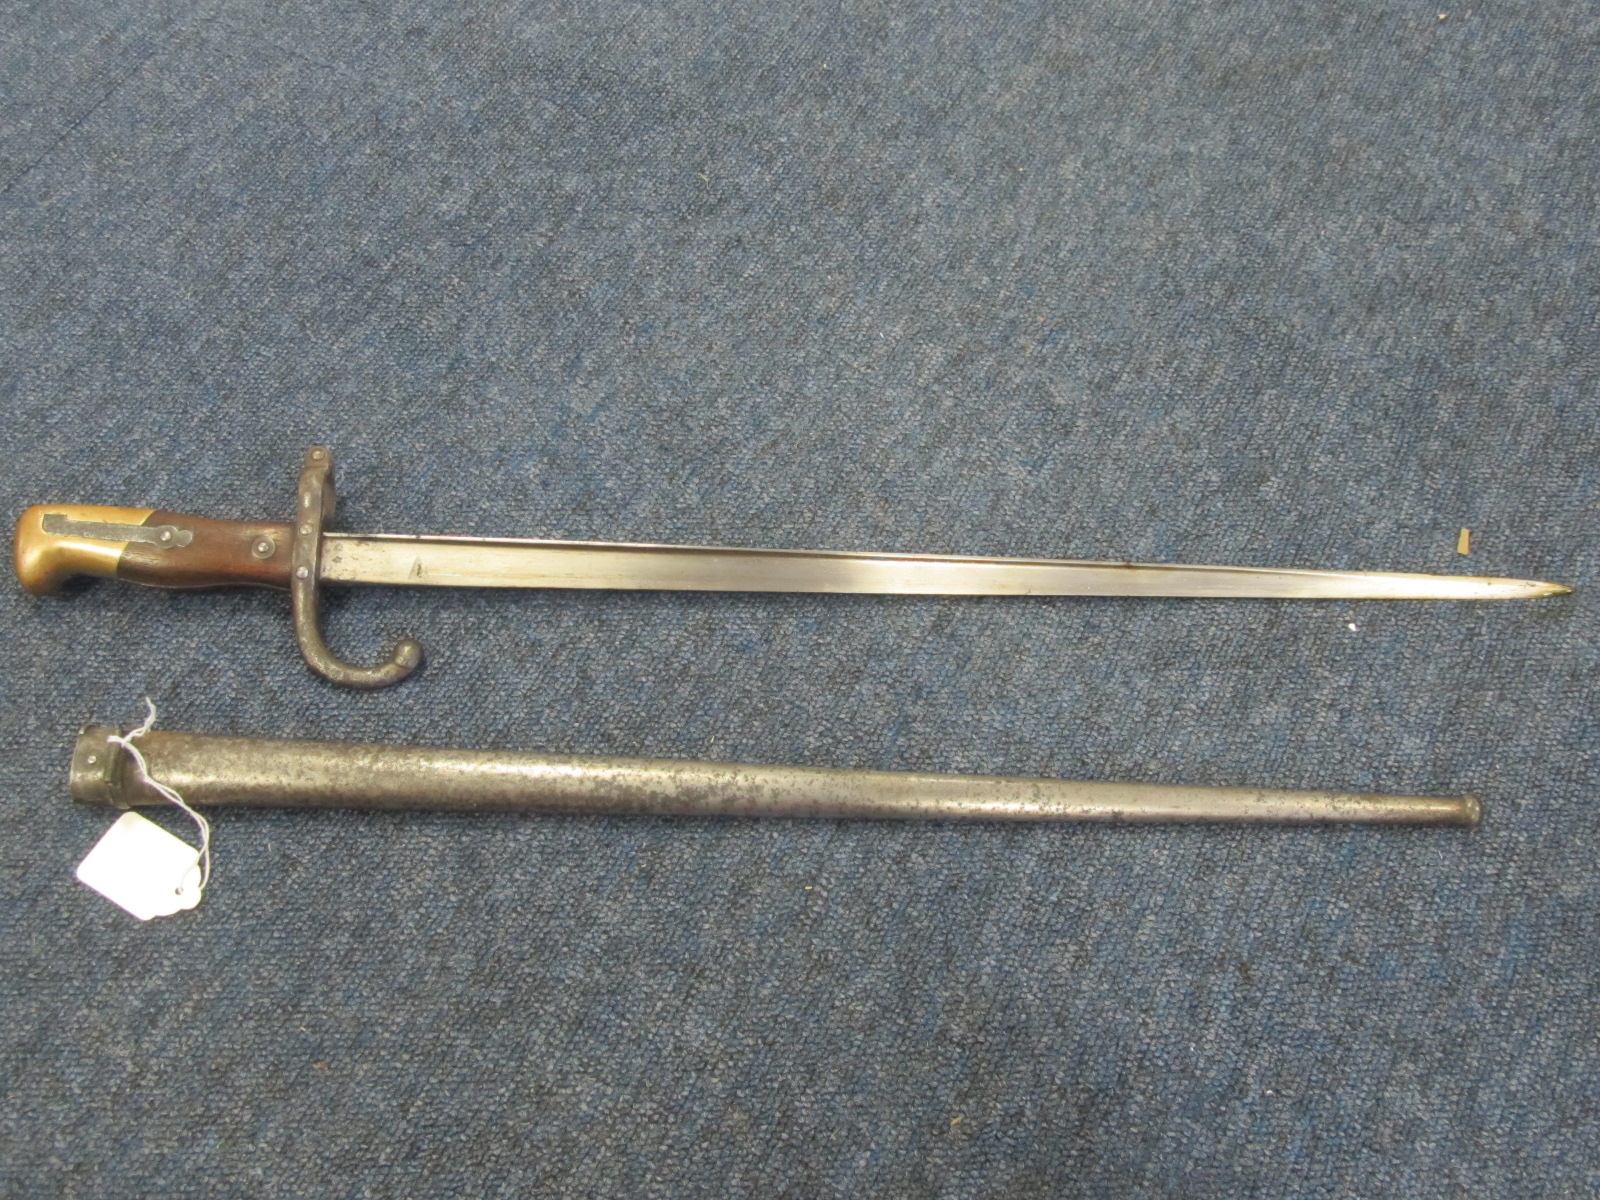 French model 1874 Gras Epee bayonet in its steel scabbard. Made at St Etienne, January 1880. Some